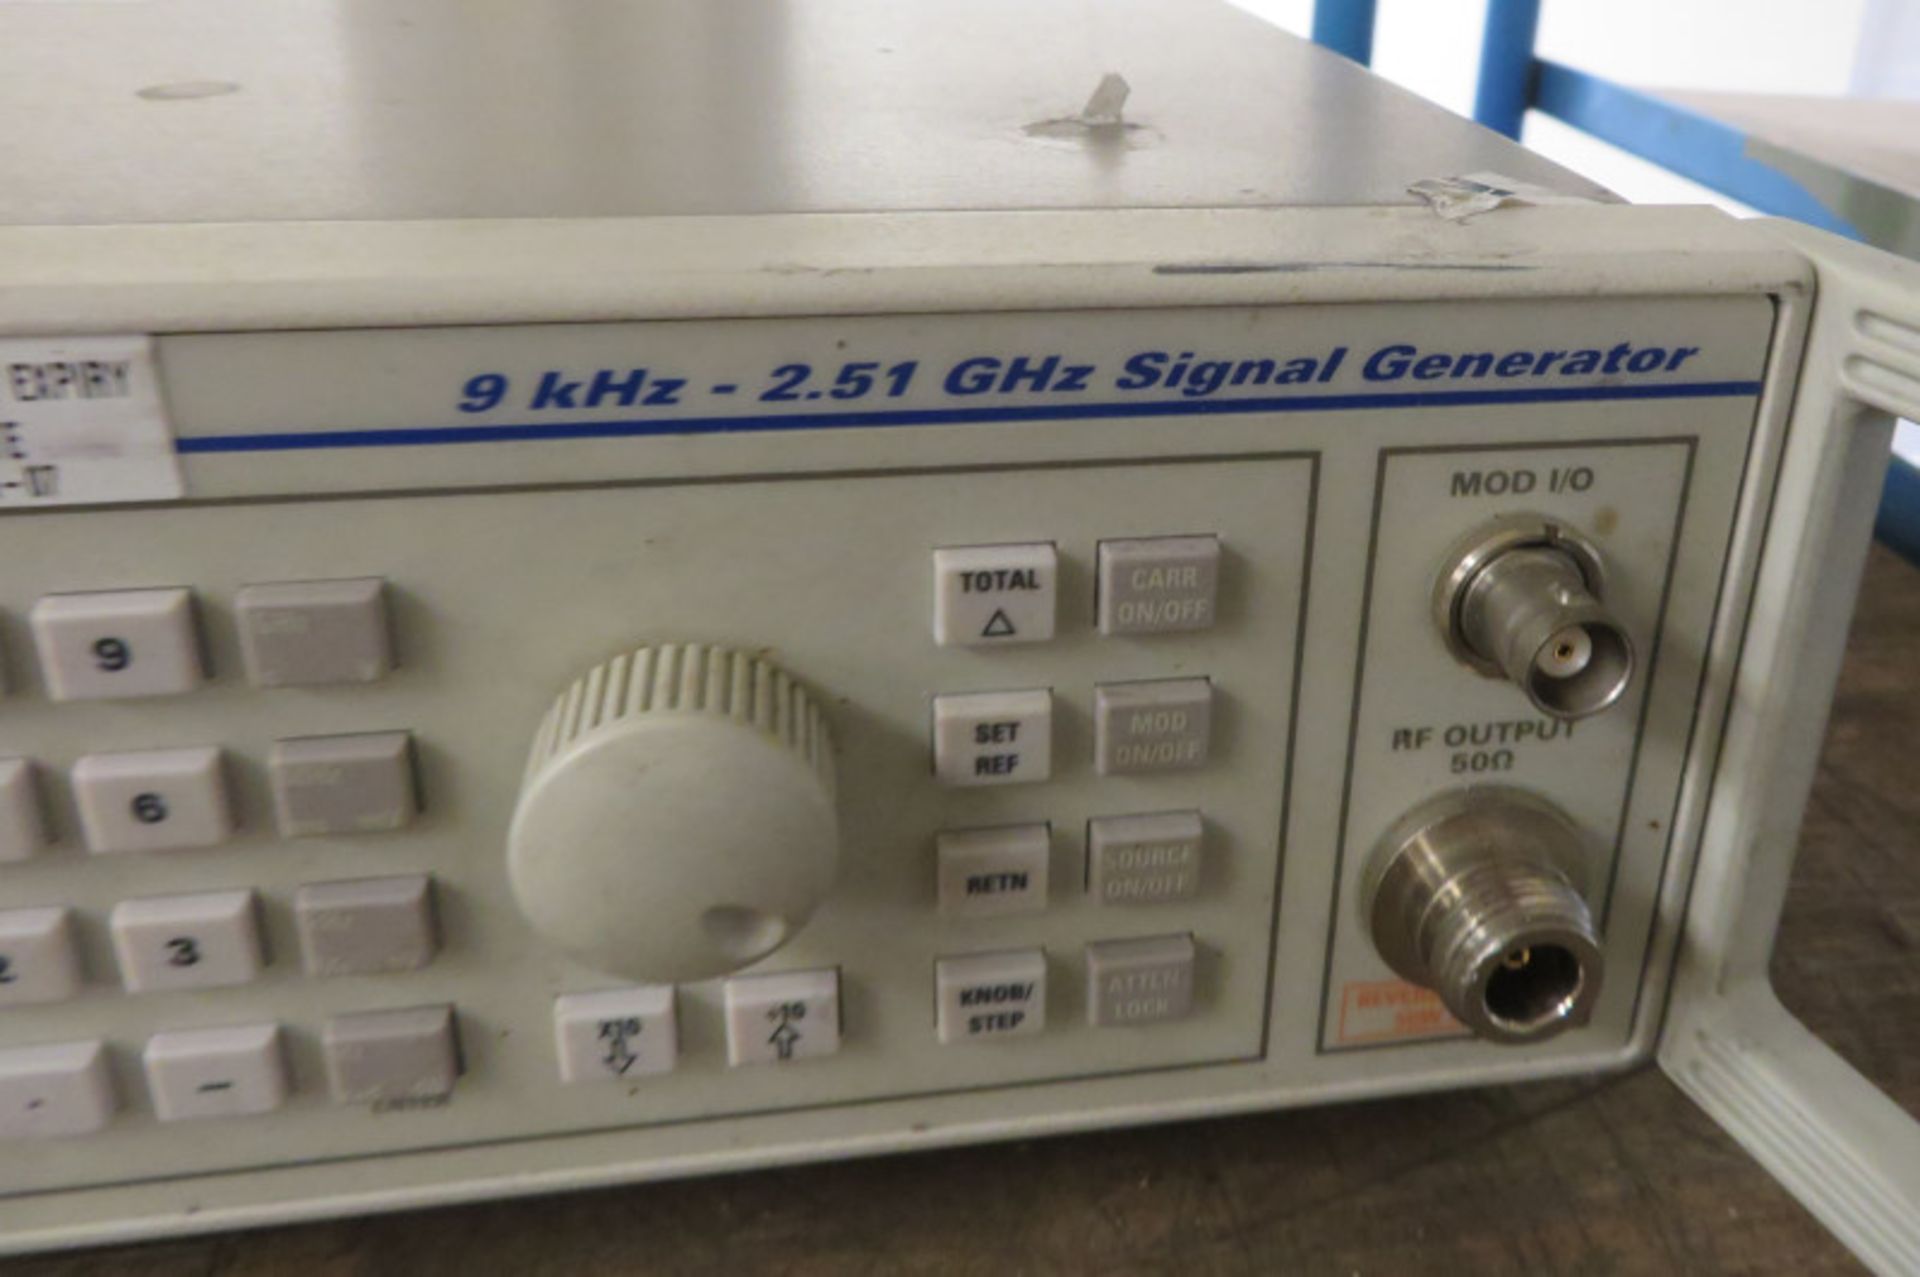 IFR 2025 9kHz - 2.51GHz Signal Generator (No Power Cable) - Image 2 of 4